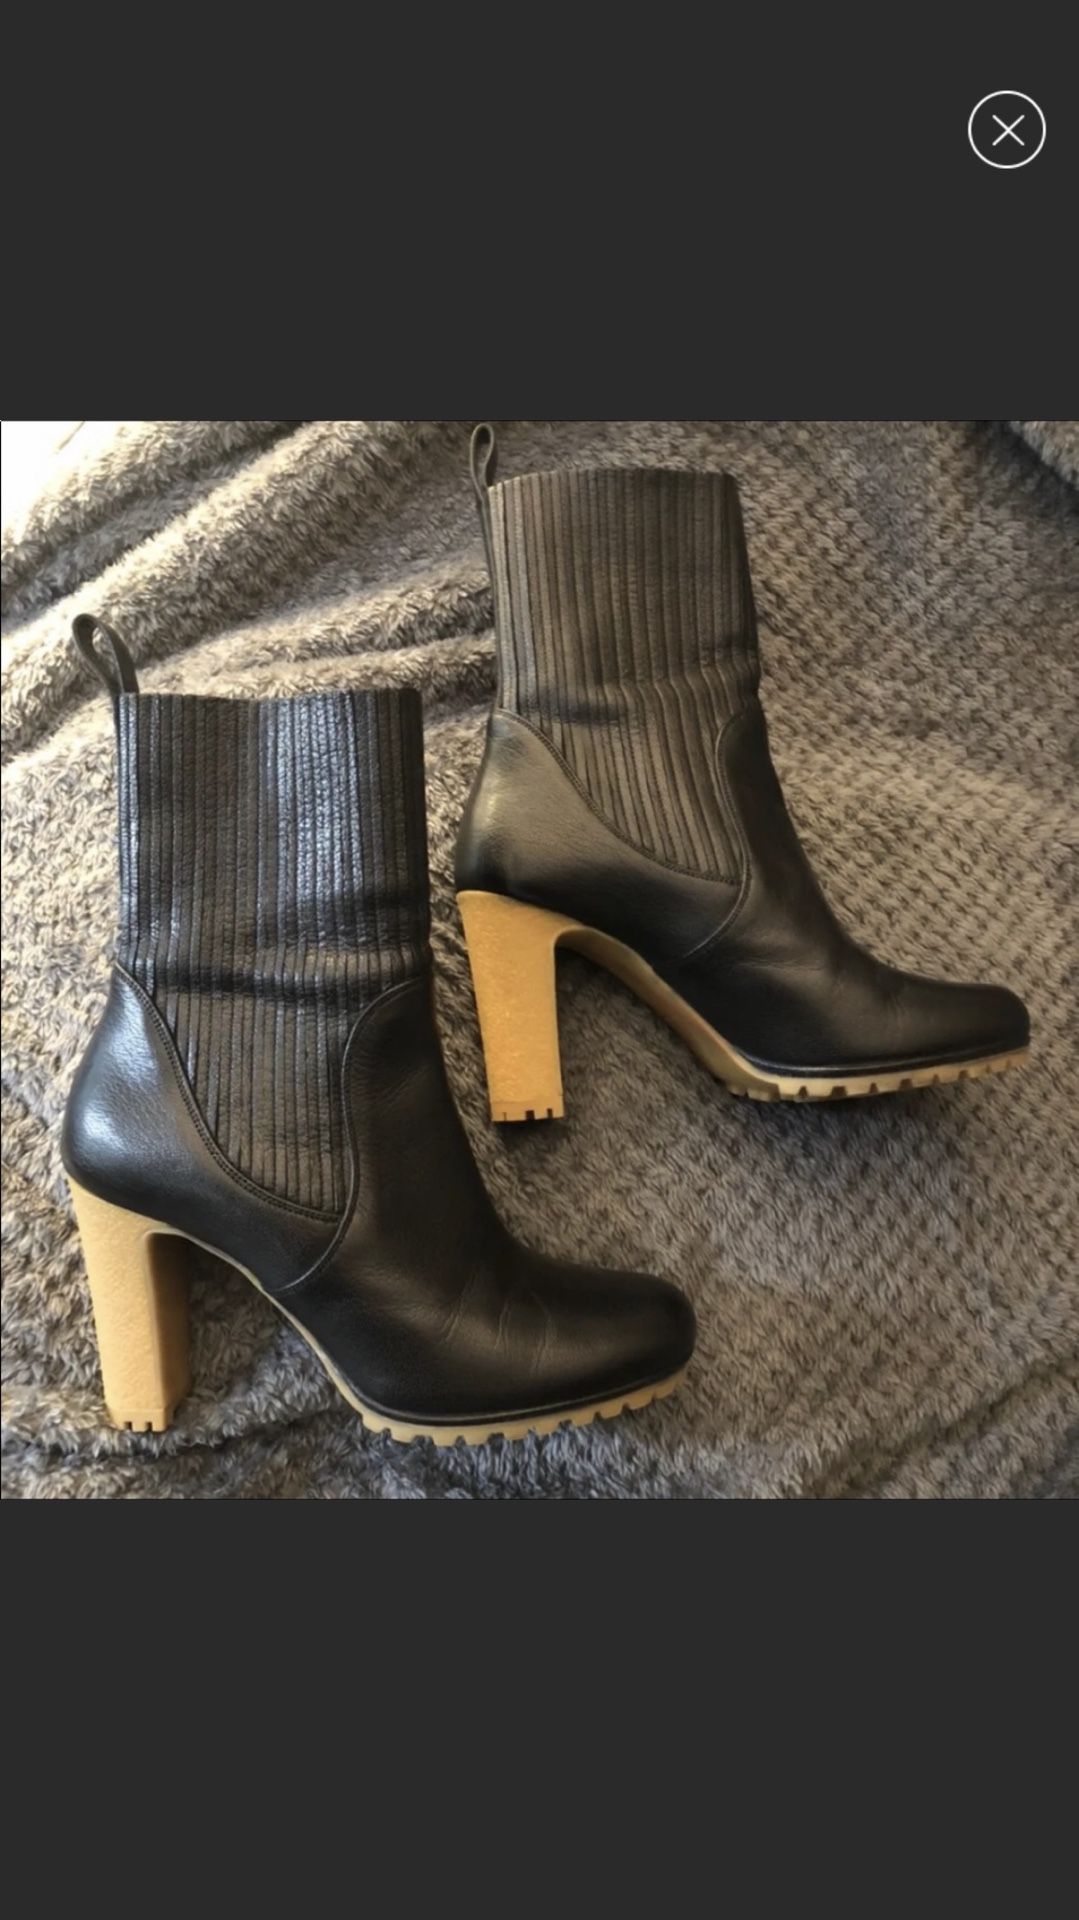 GUCCI BLACK Leather BOOTS size 37/7 $250. EDITH CUIR LUXOR Original Box. ELASTICIZED ANKLE BOOTS